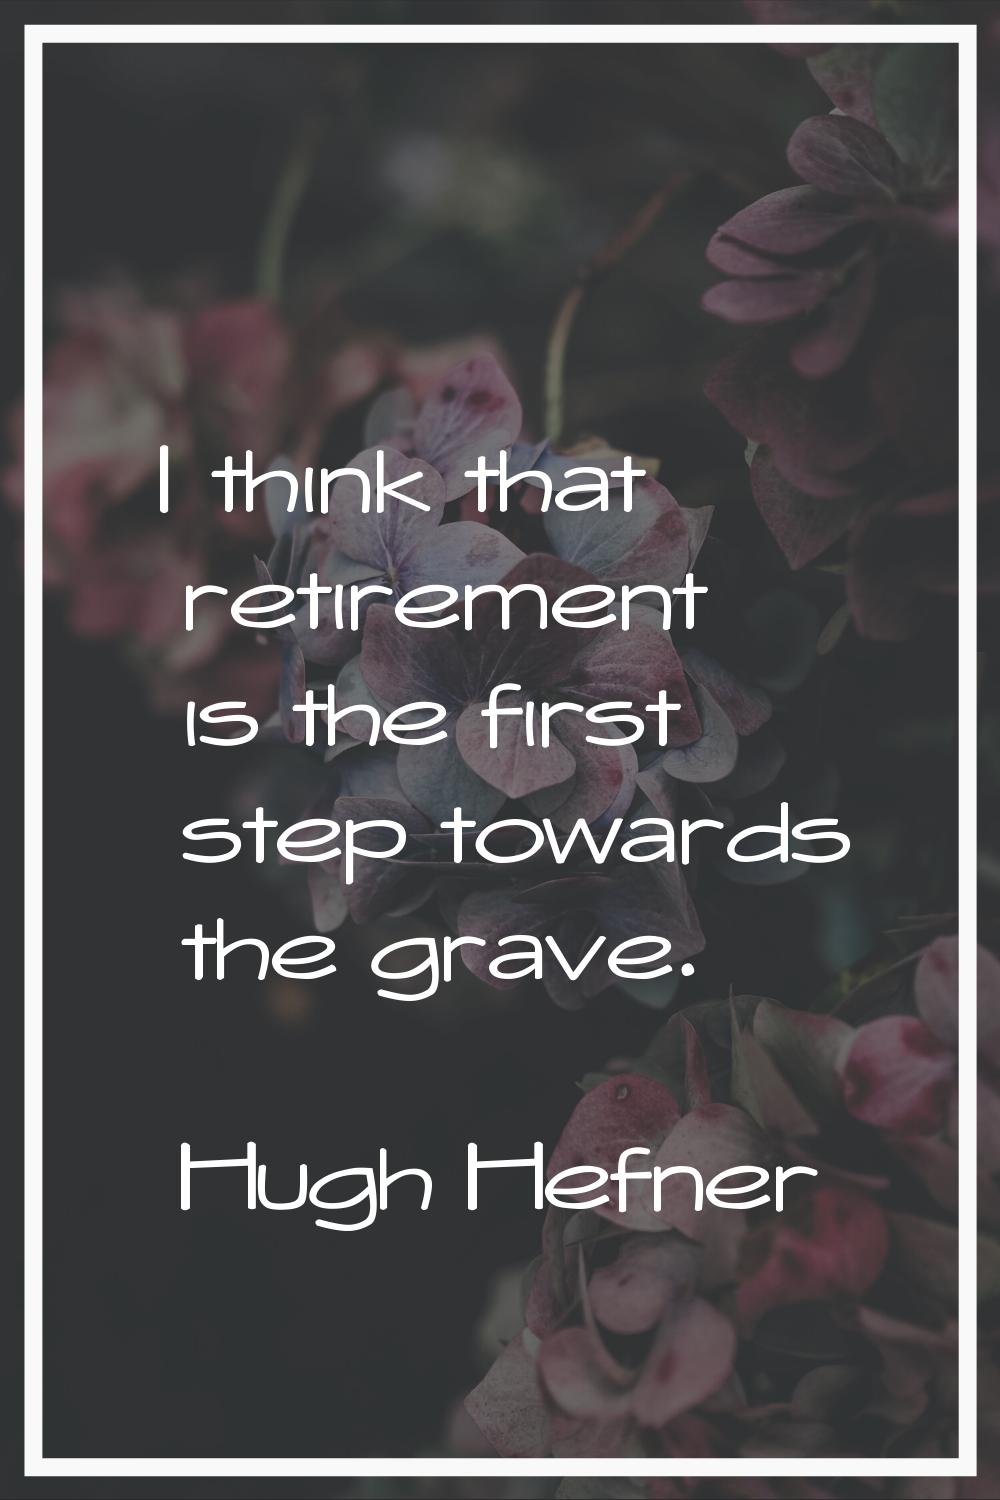 I think that retirement is the first step towards the grave.